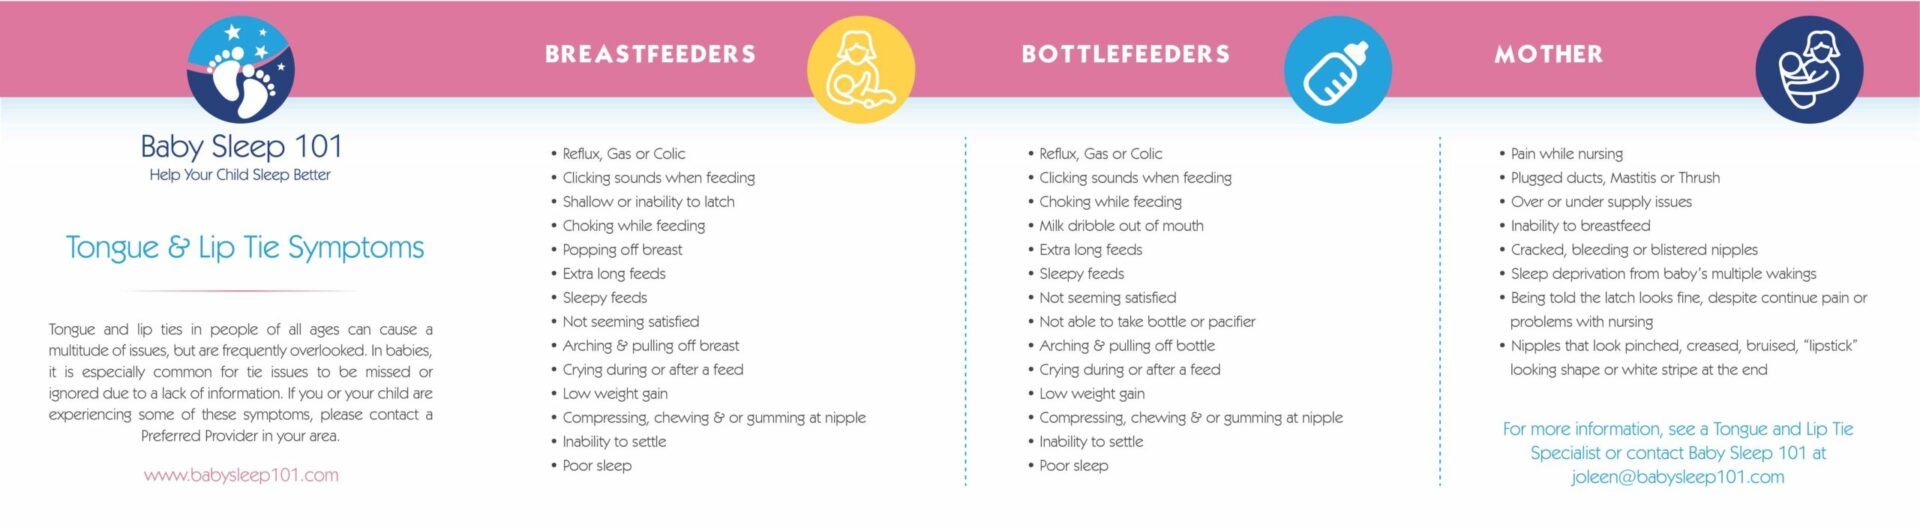 Tongue tie symptoms for breast and bottle feeders